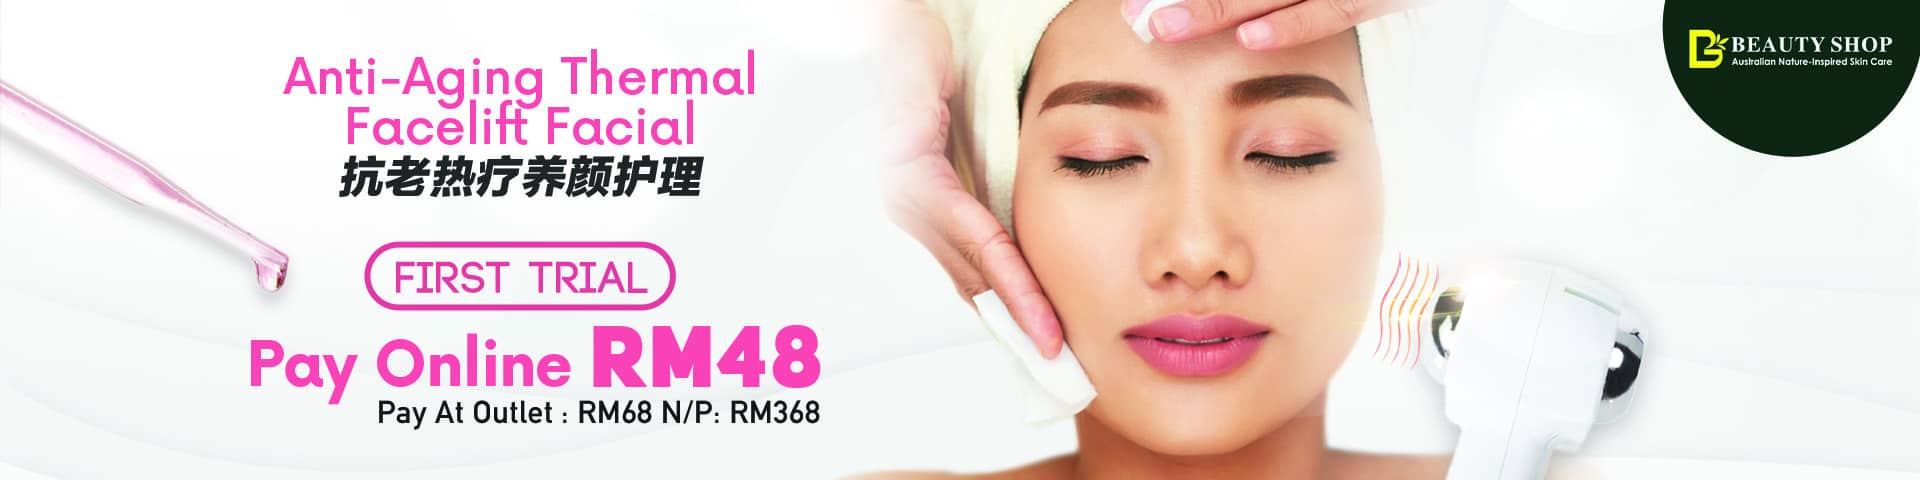 Beauty-Shop-Anti-Aging-Thermal-Lift-Banner-01